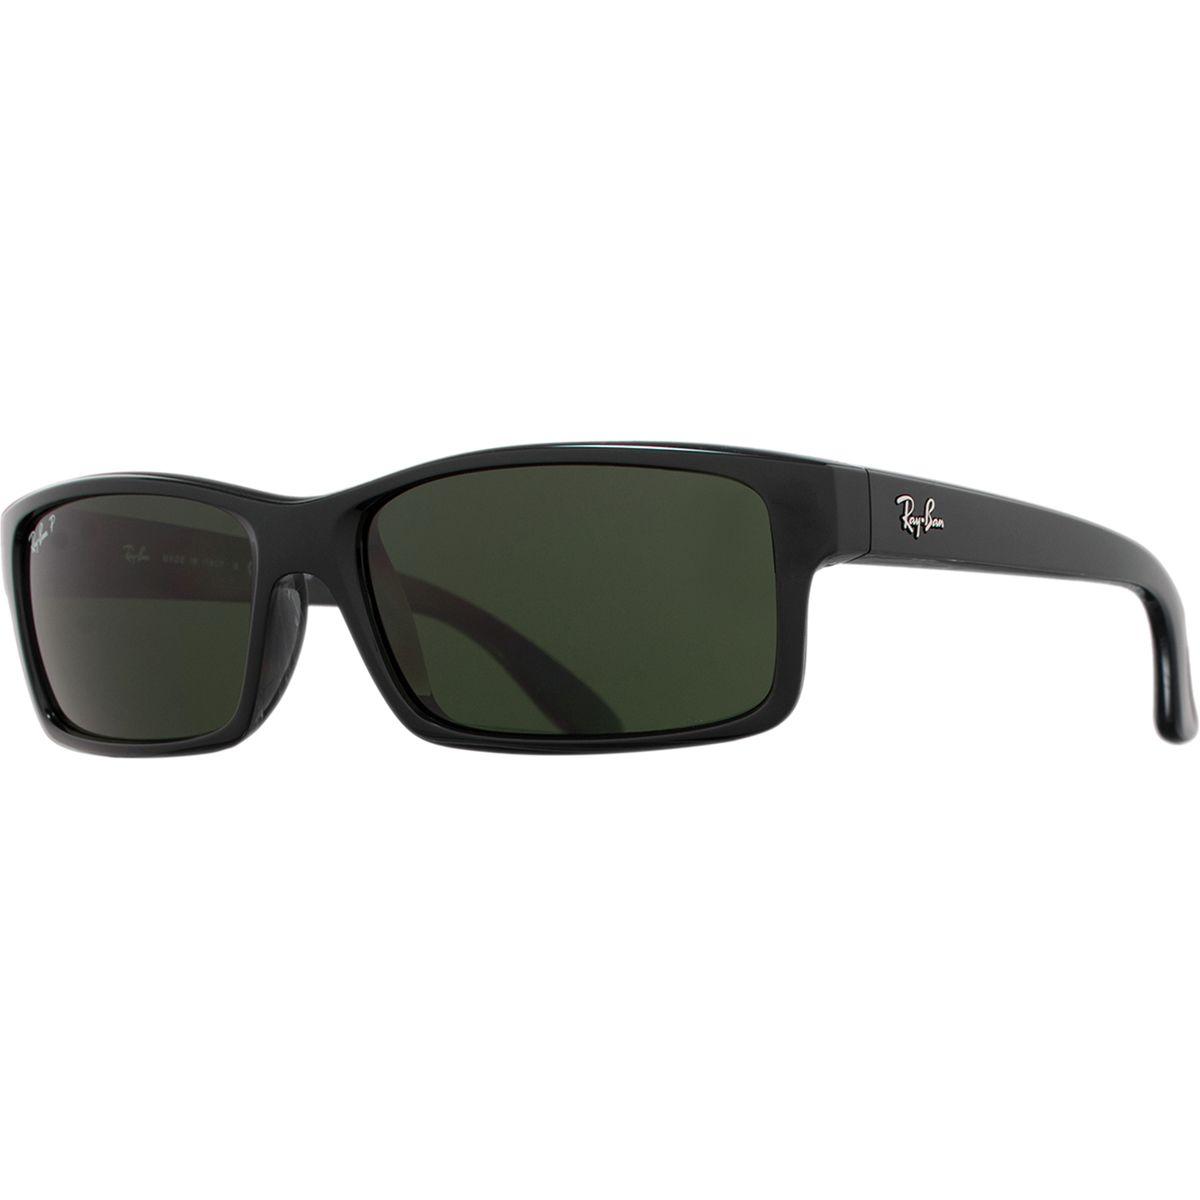 Ray-Ban Synthetic Rb4151 Polarized Sunglasses in Black for Men - Lyst